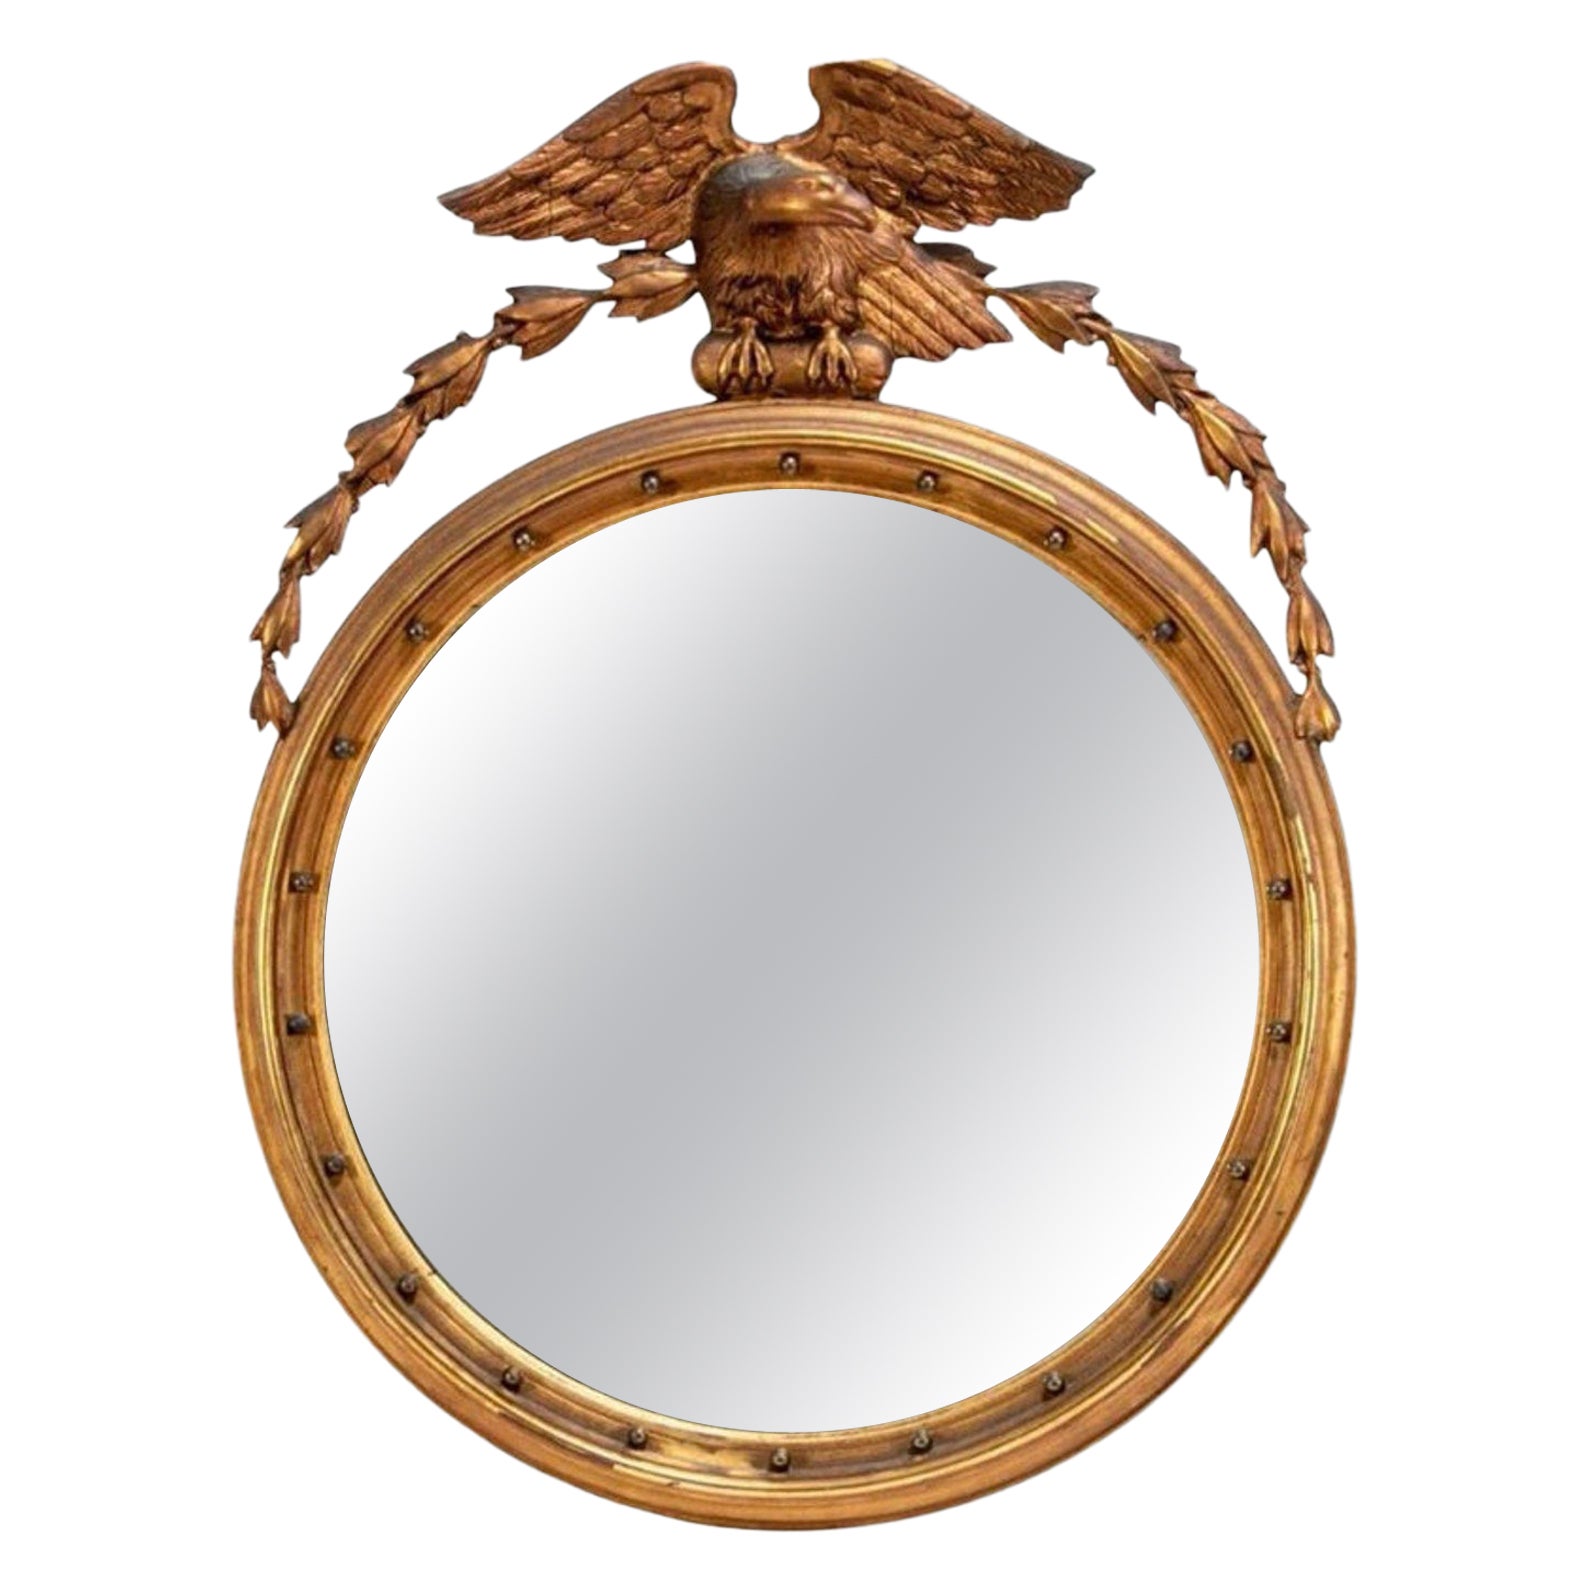 19th Century American Federal Wall Mirror with Eagle Crest For Sale